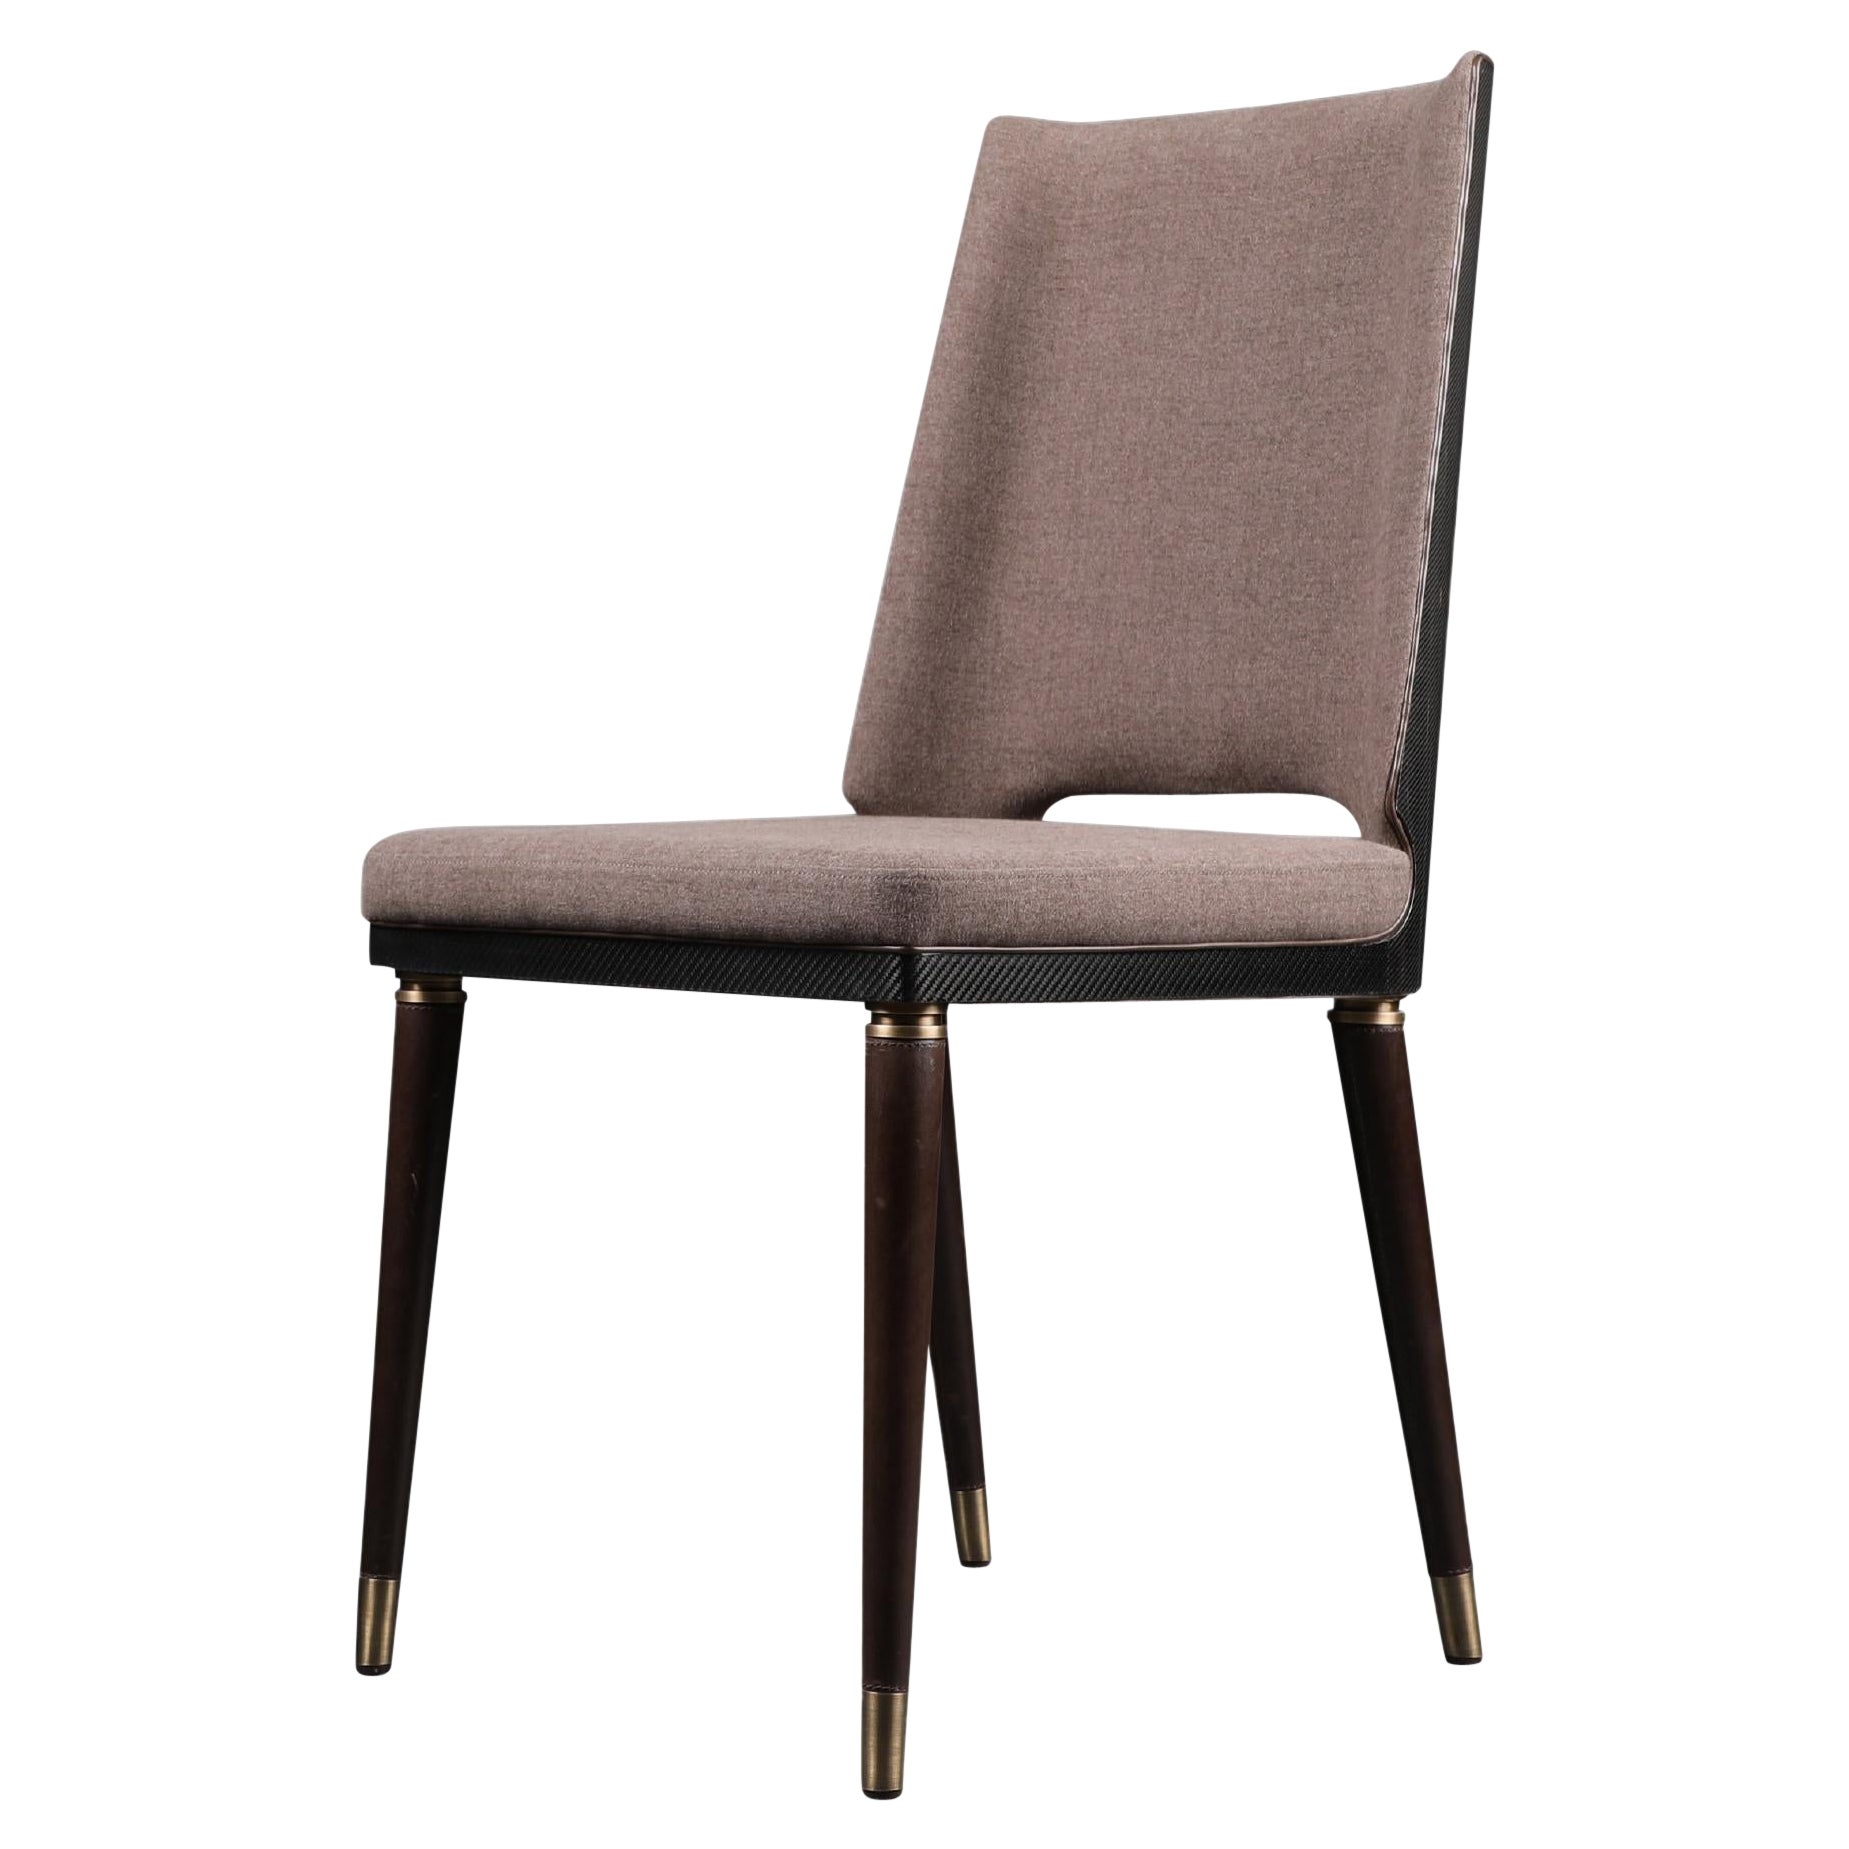 Carbon Fibre Irving Dining Chair by Madheke